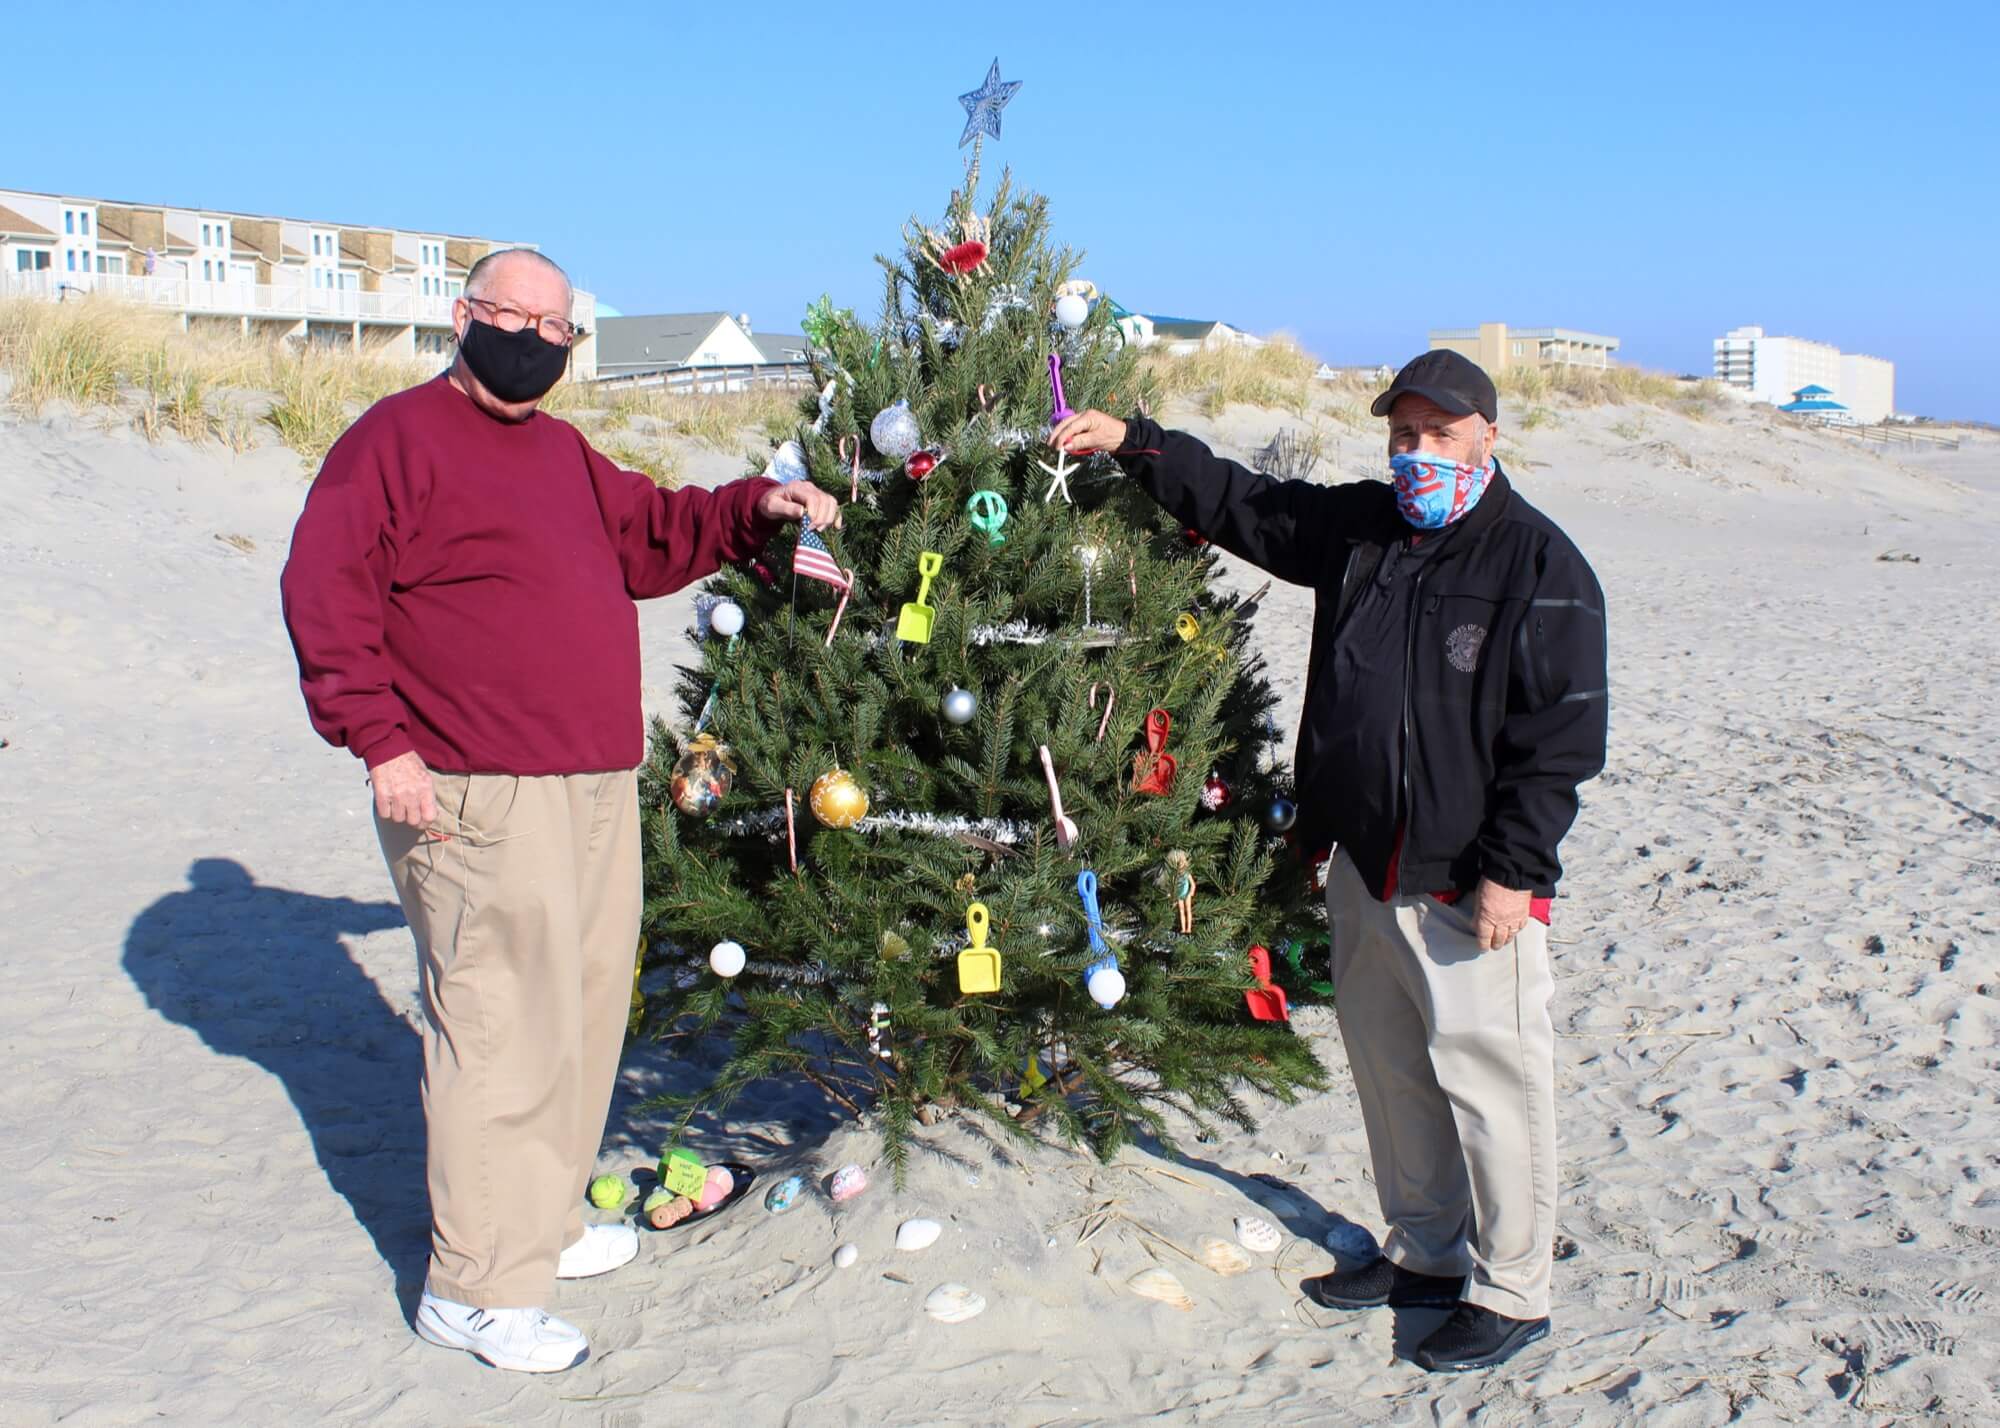 After Sea Isle City residents Nicholas and Shannon Giordano and their children mounted a Douglas Fir Christmas tree in the sand on the resort’s 44th Street beach